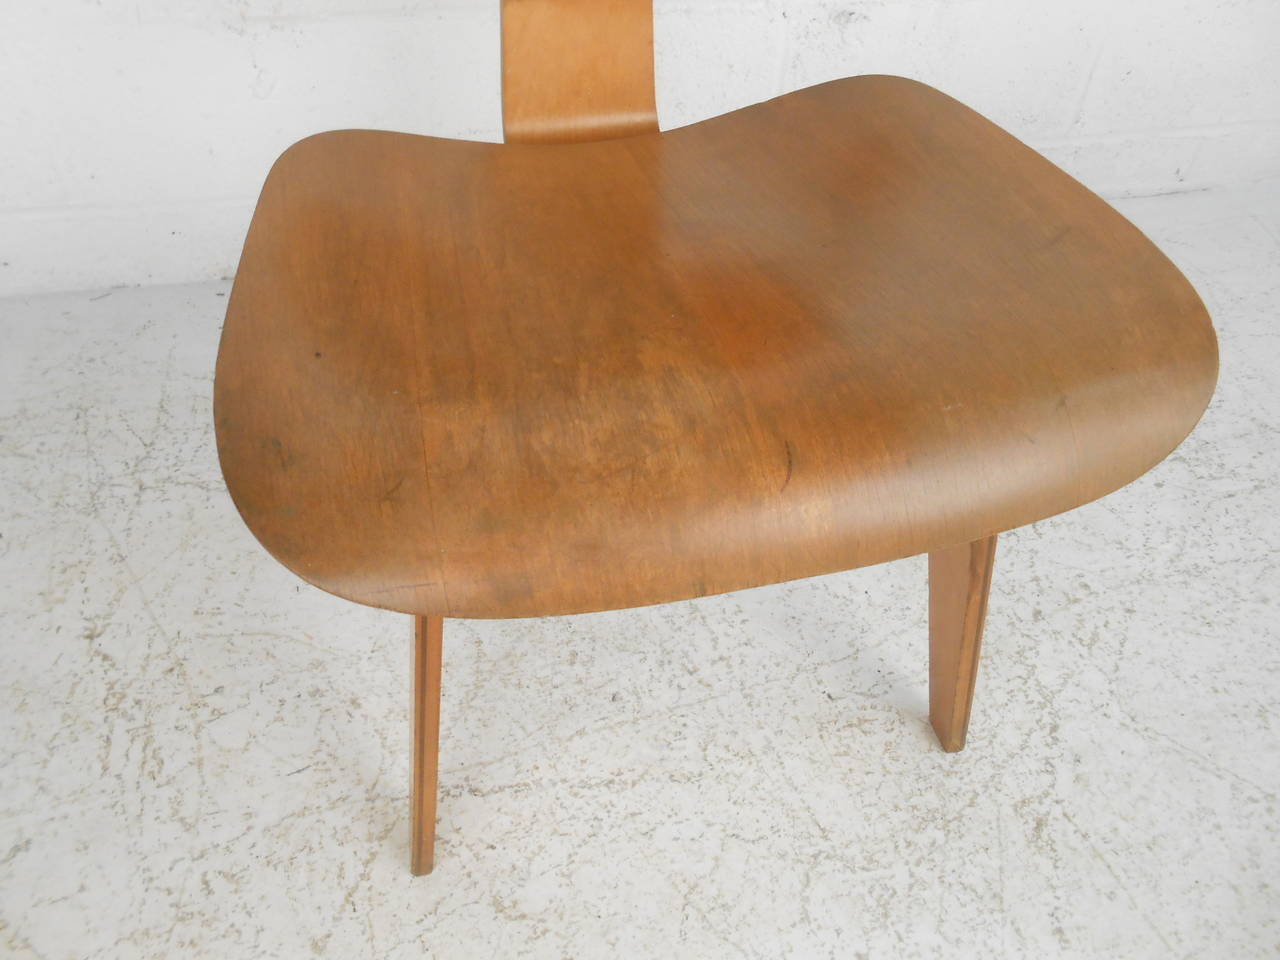 American Midcentury DCW Charles Eames Wood Lounge Chair